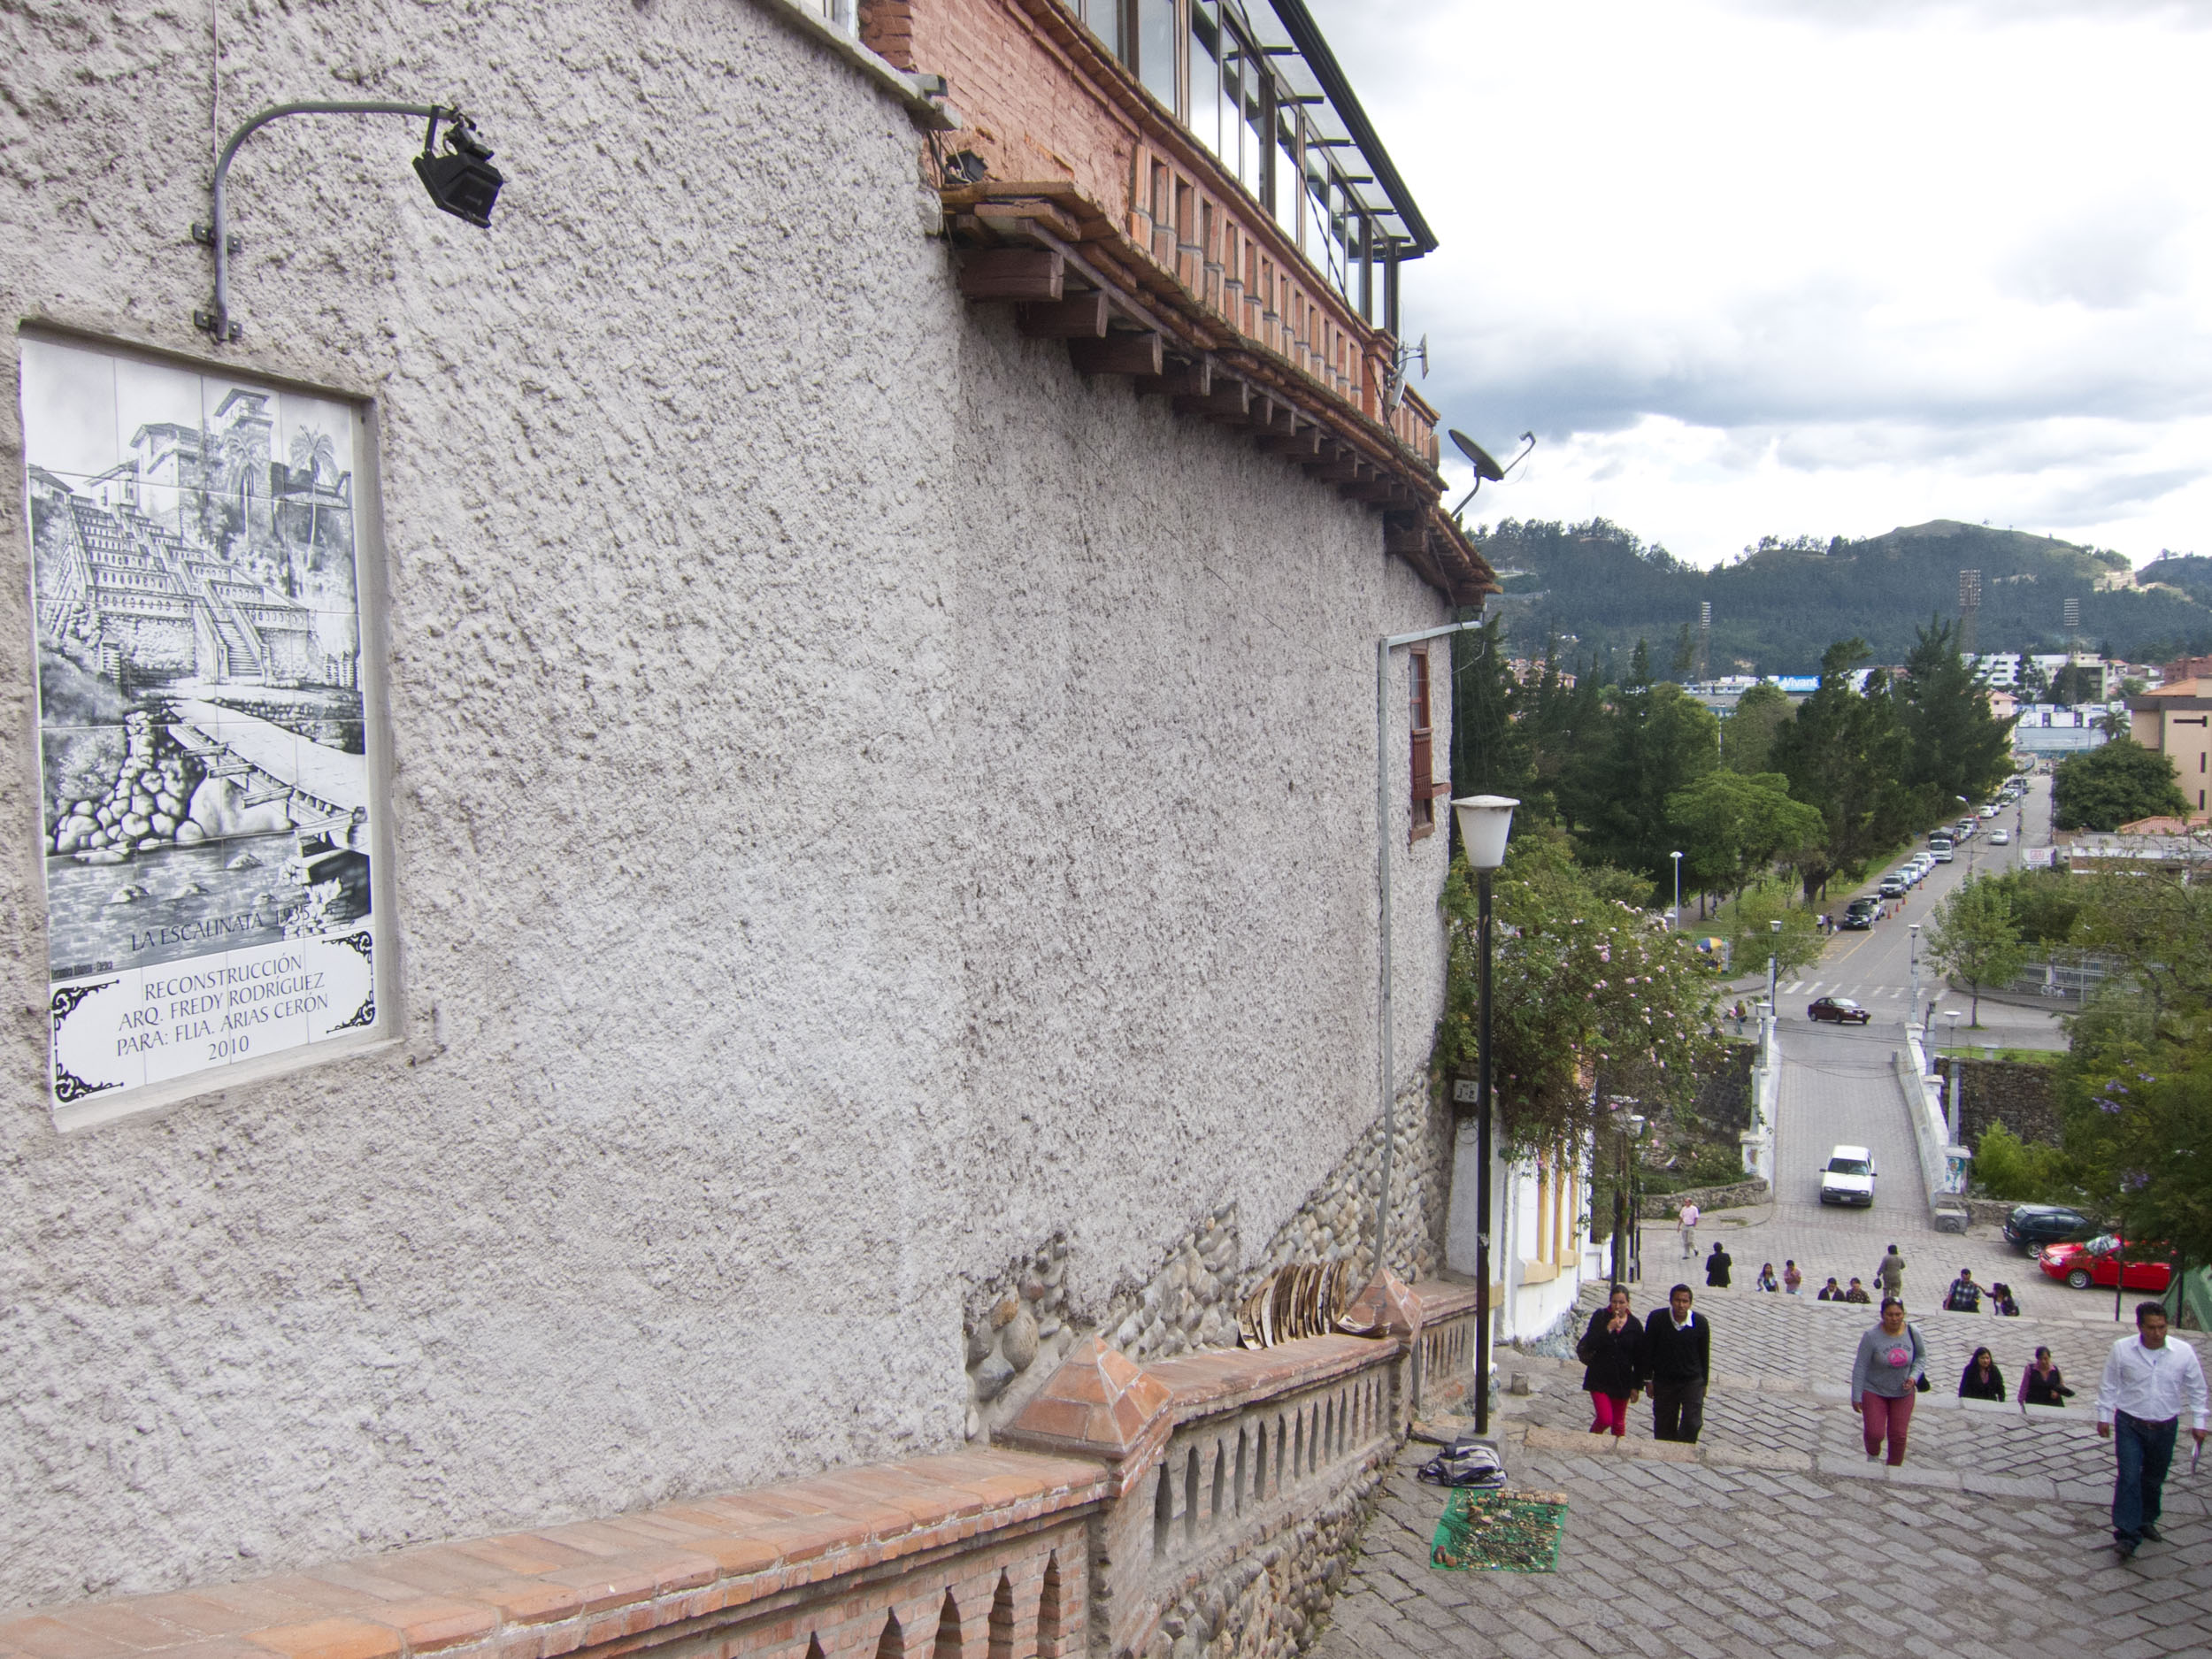 The Escalanita (stairs) connects central and southern Cuenca